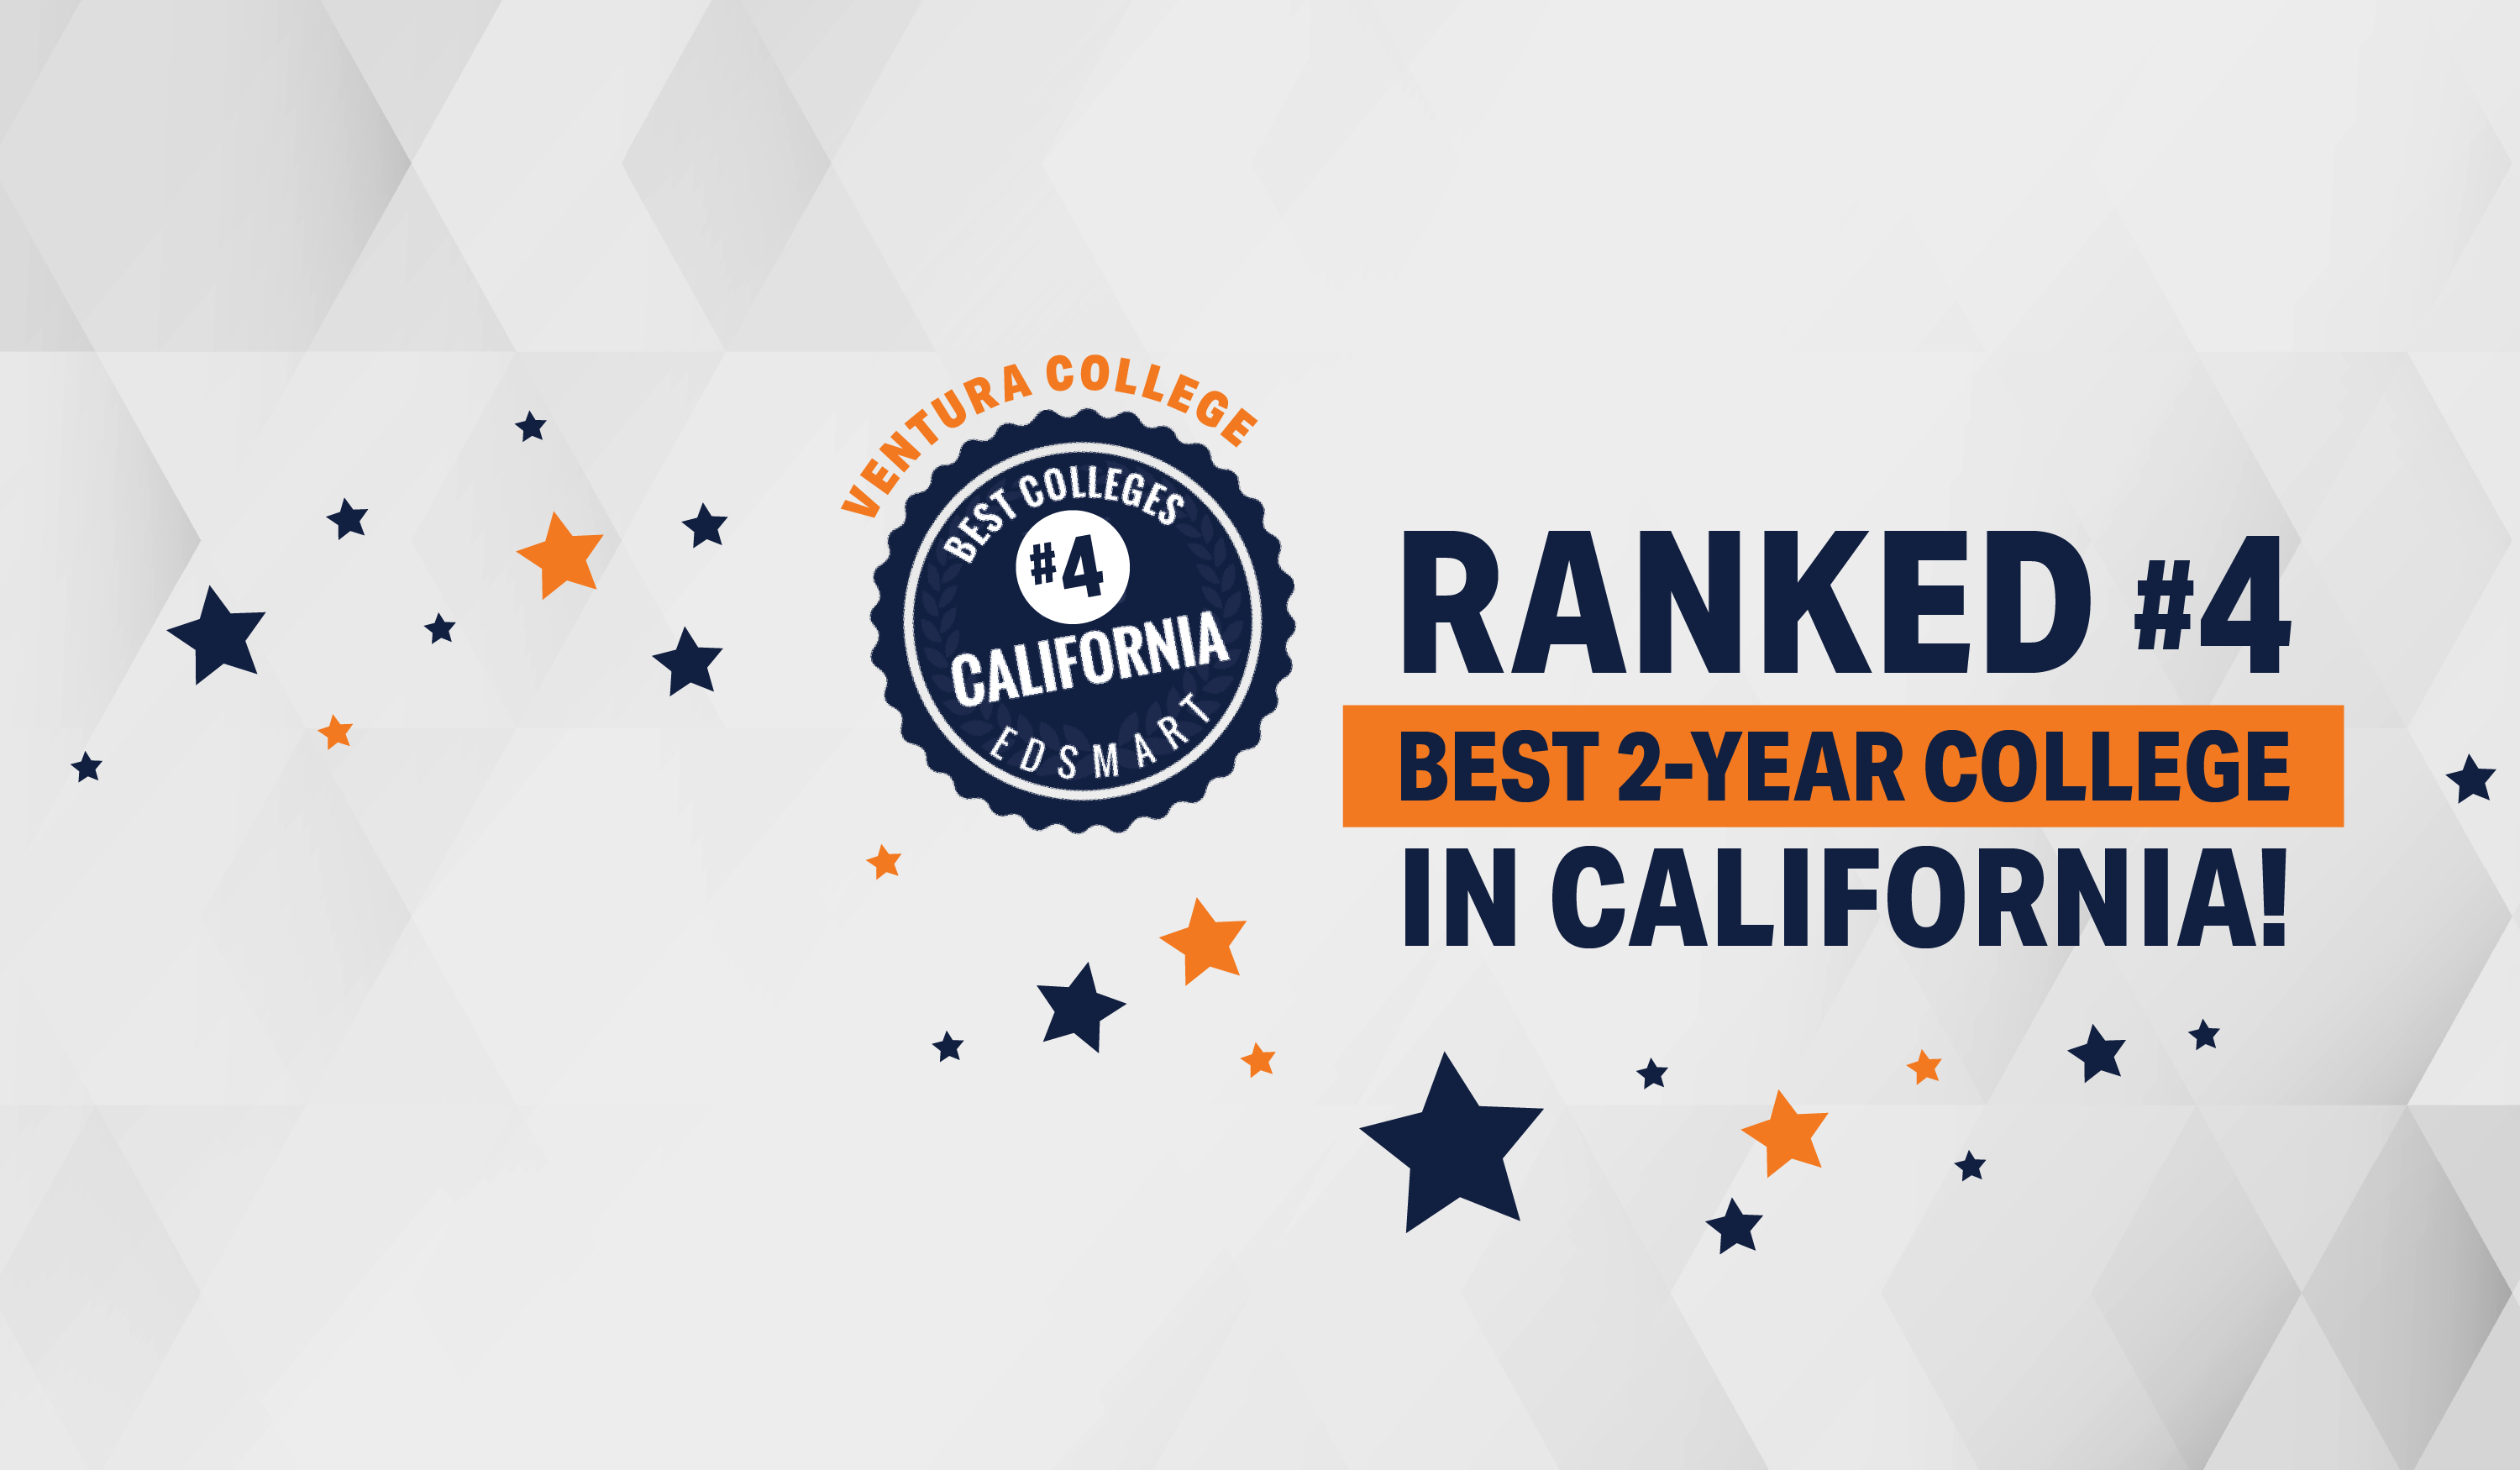 Ranked #4 Best 2-Year College in California!